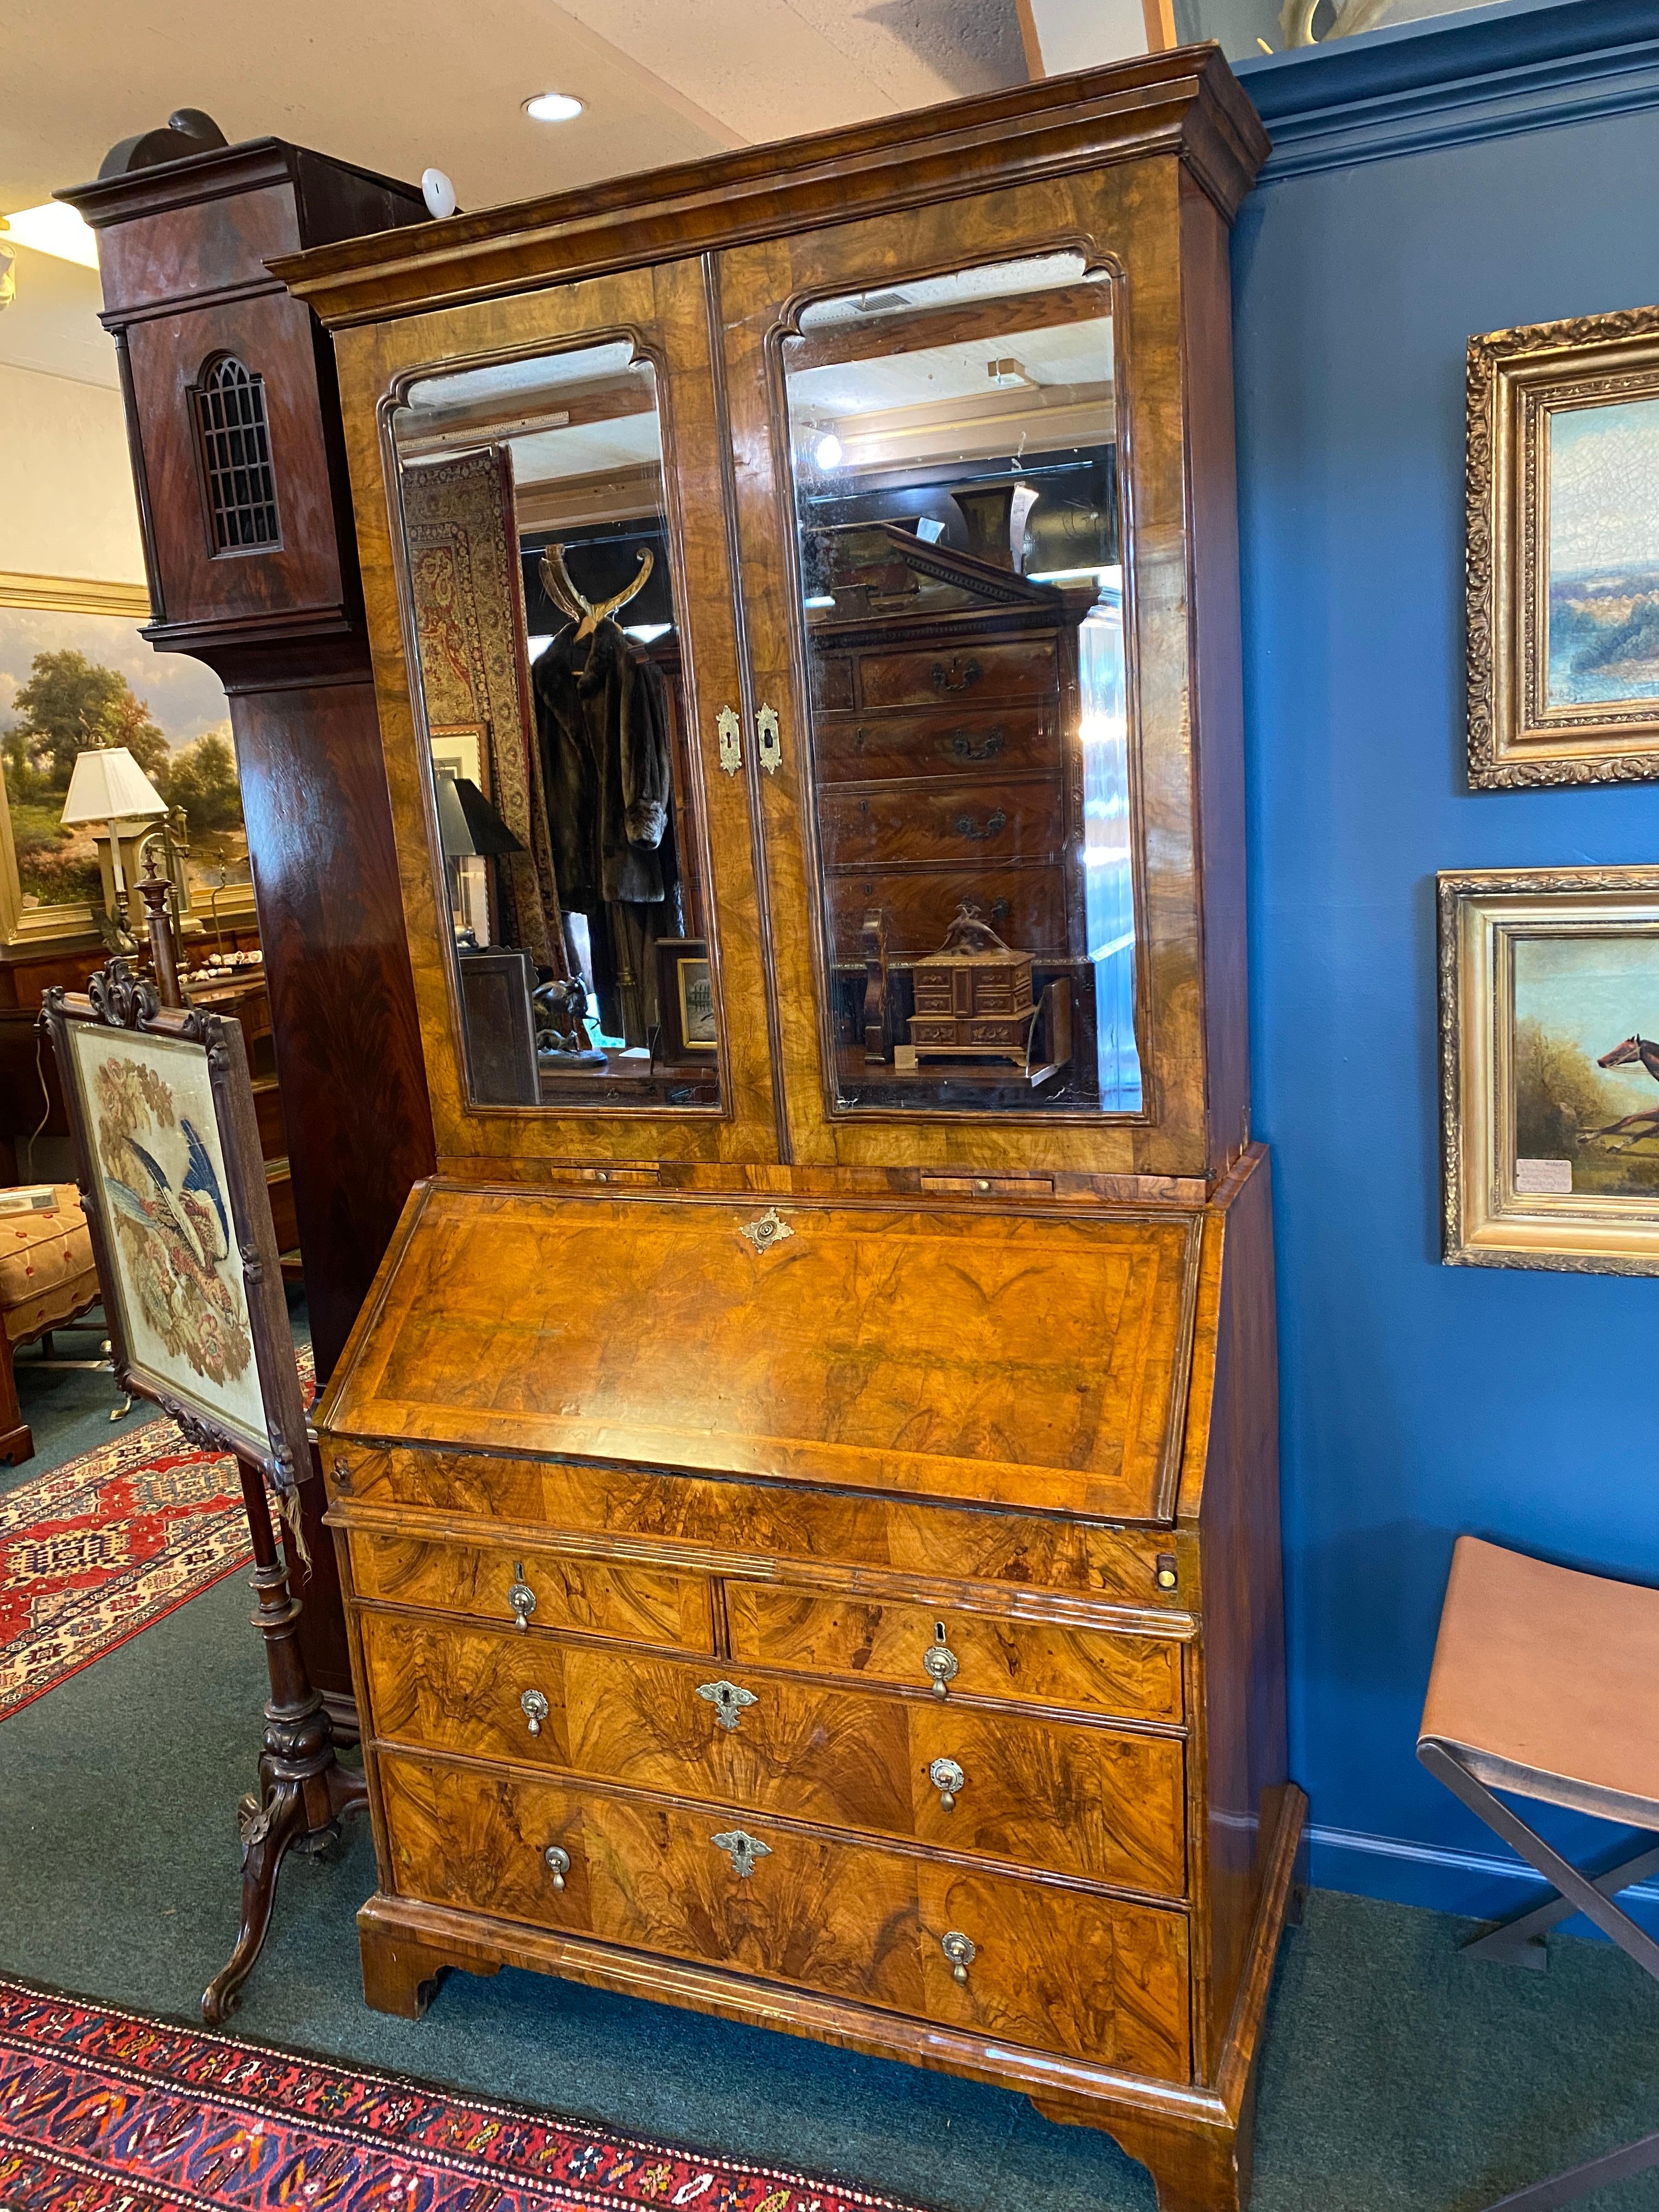 Early 18th century Queen Anne Period walnut Bureau bookcase. The rich color and original condition of this piece are outstanding. Beneath the molded cornice the two mirrored doors retain their original shaped plates and enclose adjustable shelves